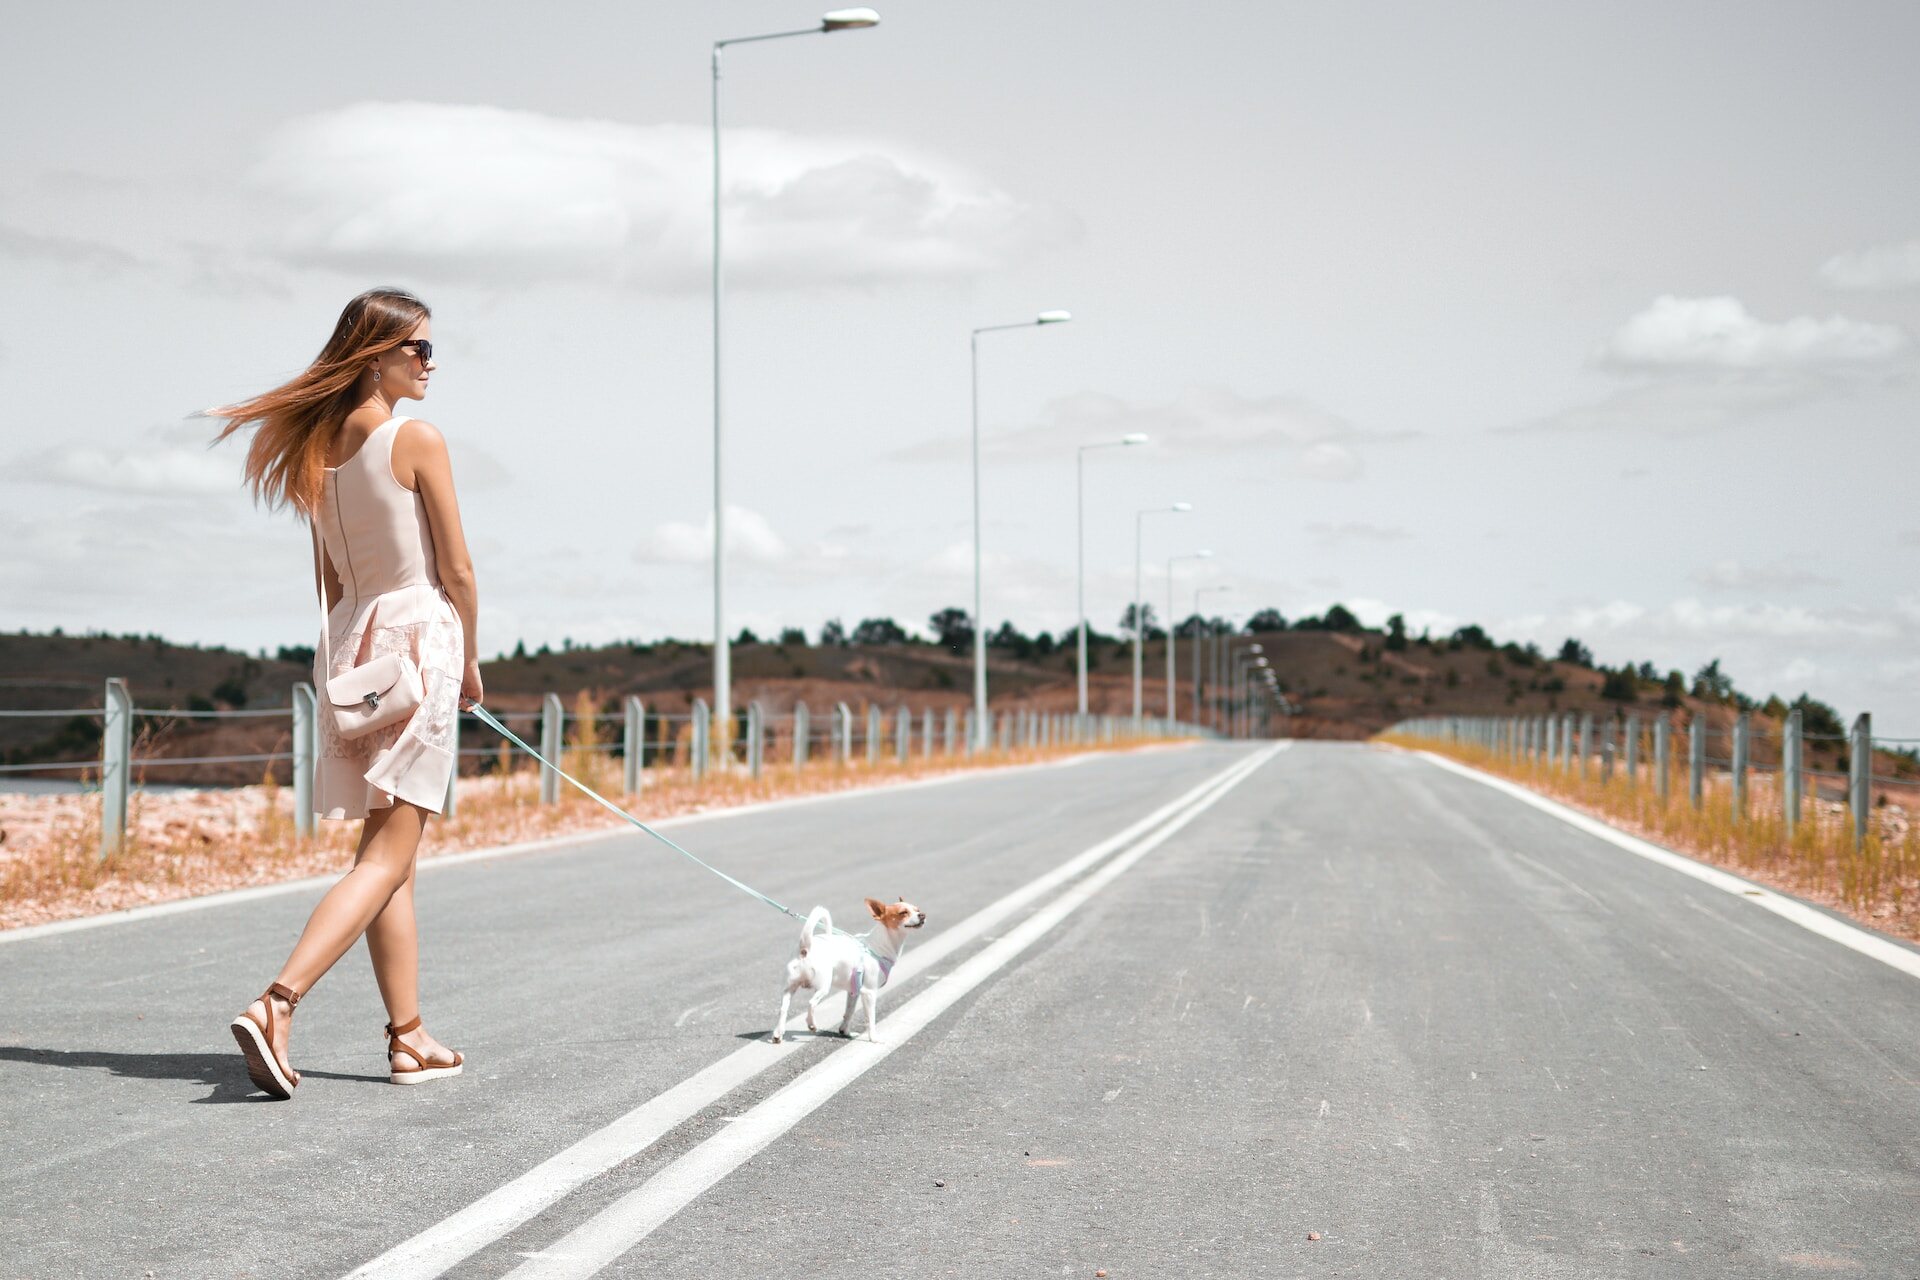 A woman walking her dog on a street on a sunny day